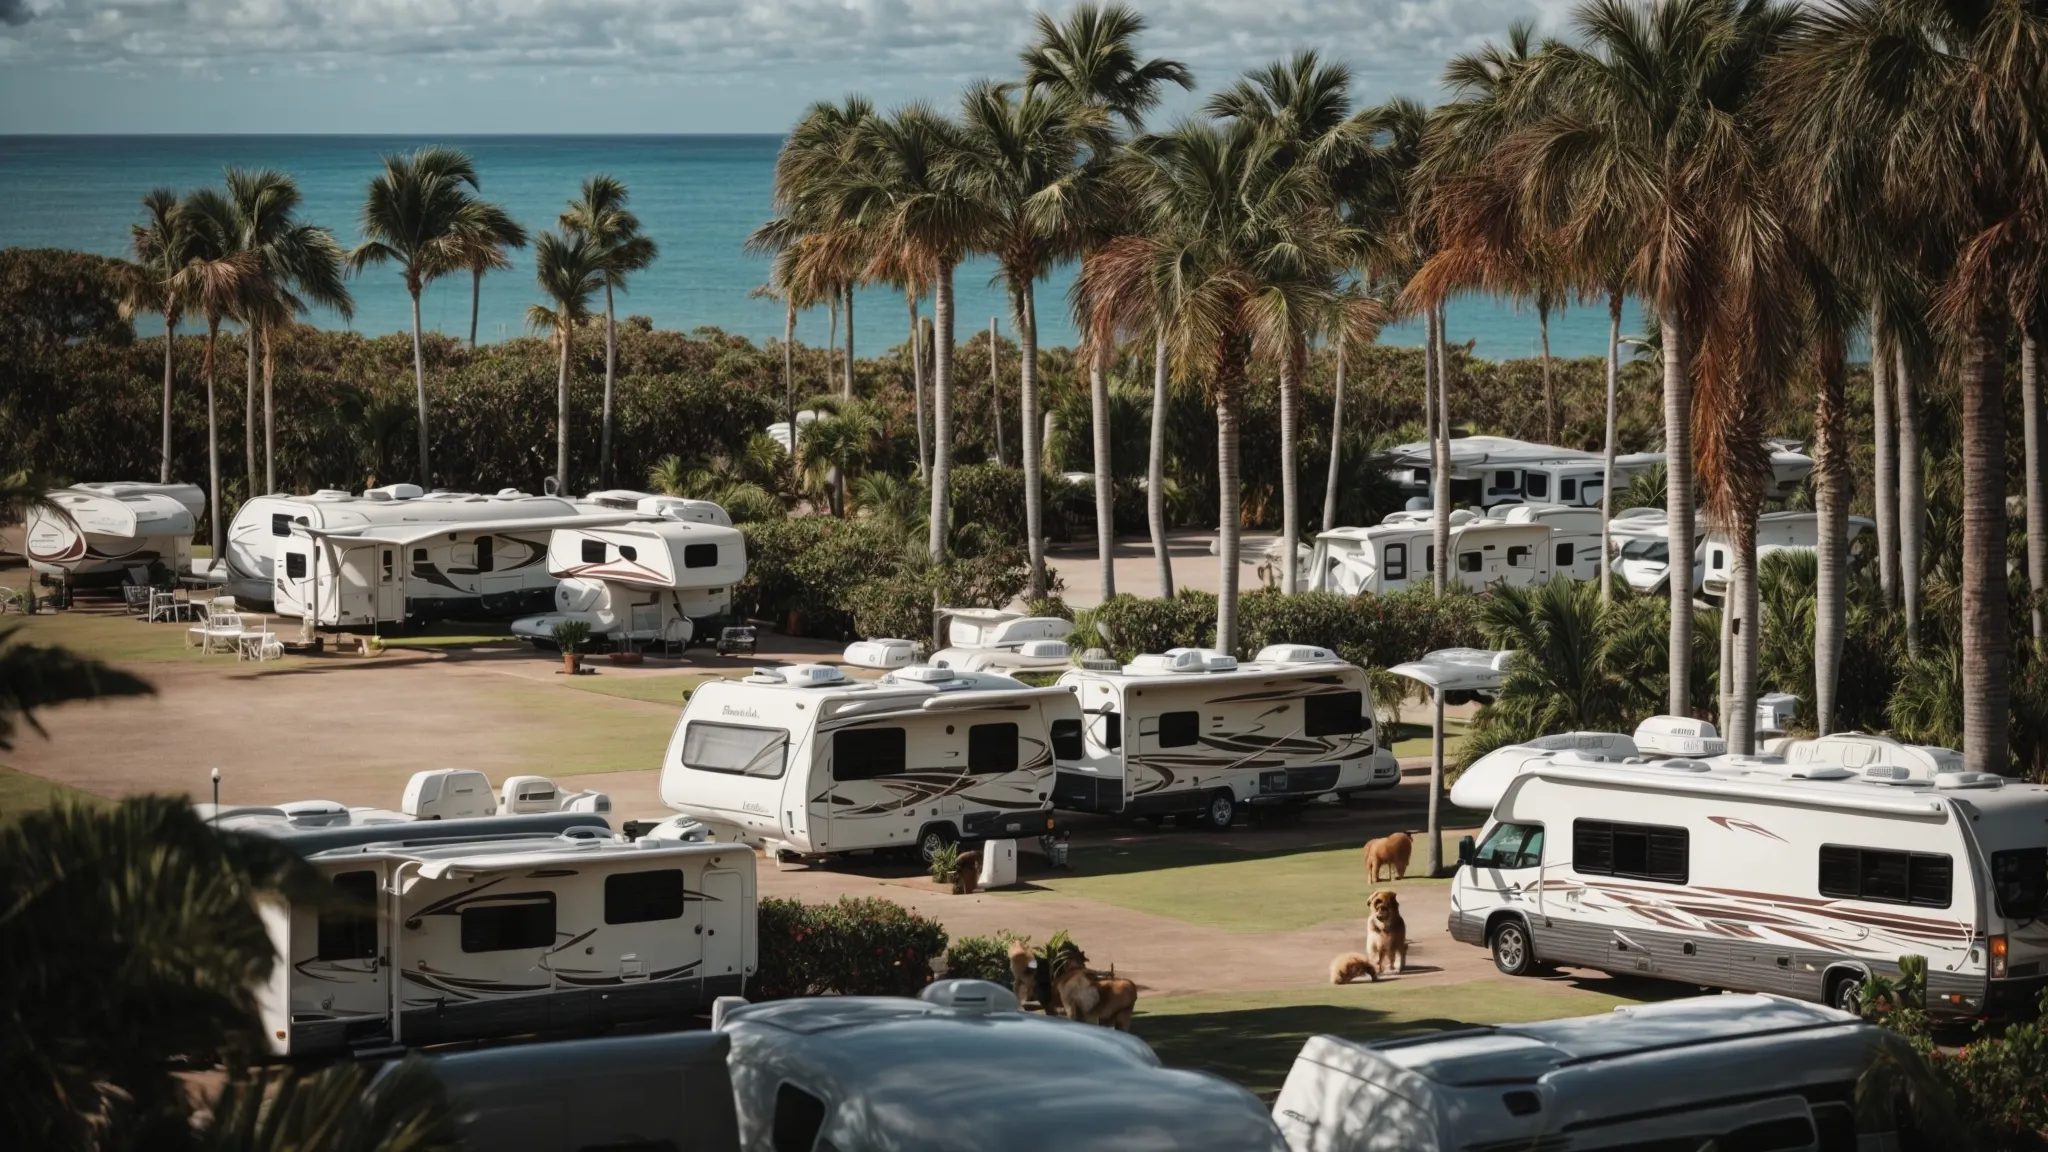 a scenic rv park overlooking the ocean with a designated dog play area and several rvs settled among palm trees.